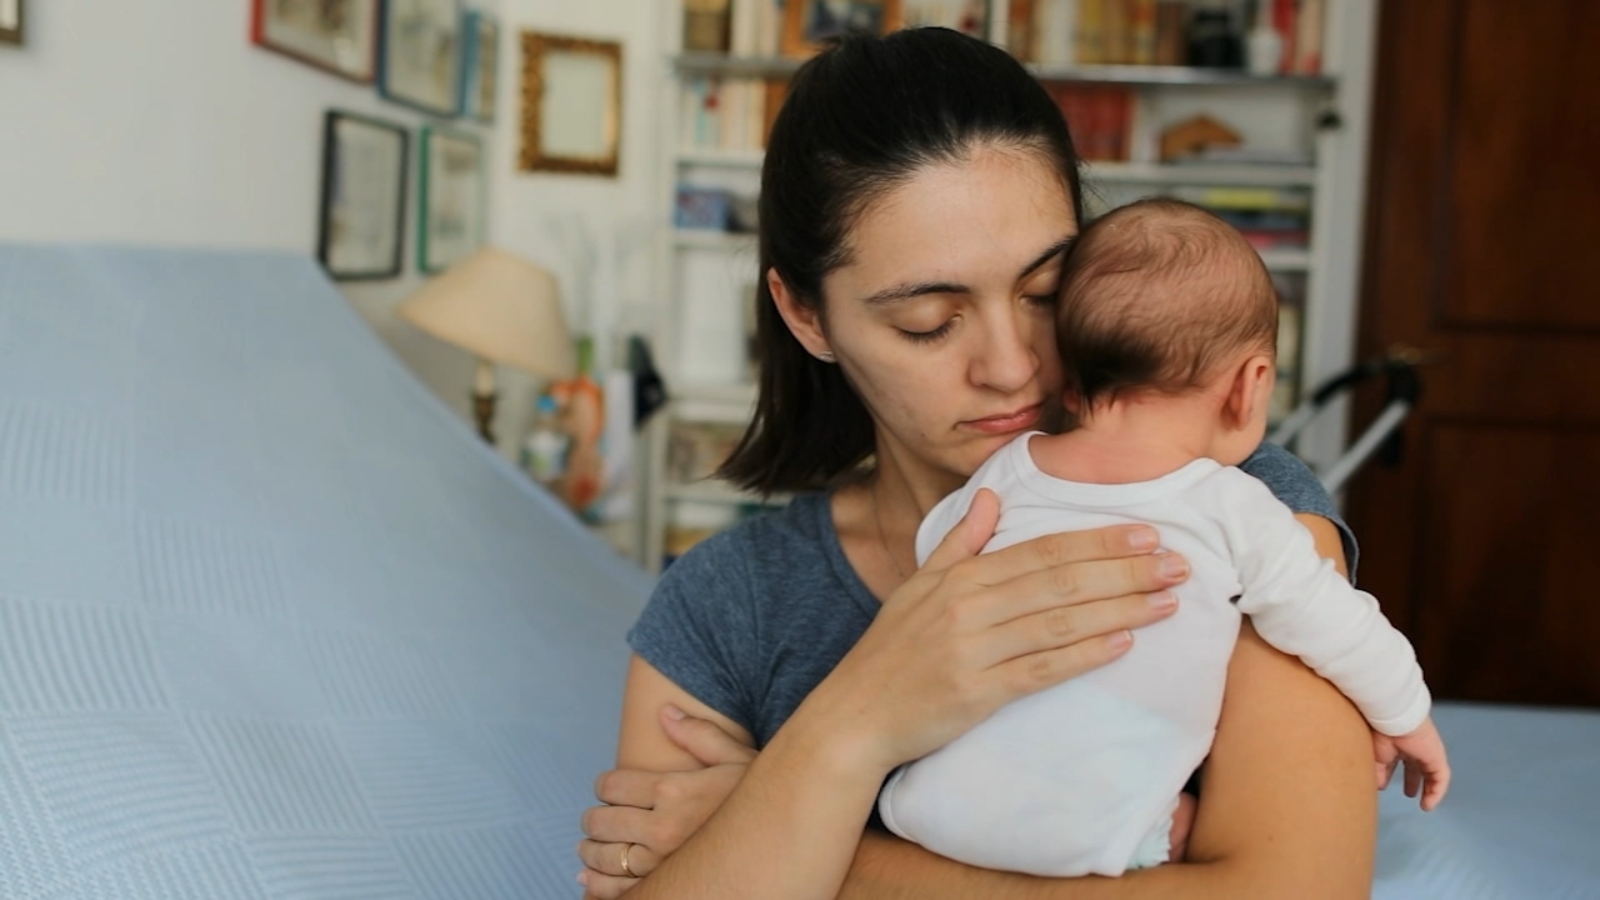 ‘Facing the Facts’: The push for expanded parental leave in United States [Video]